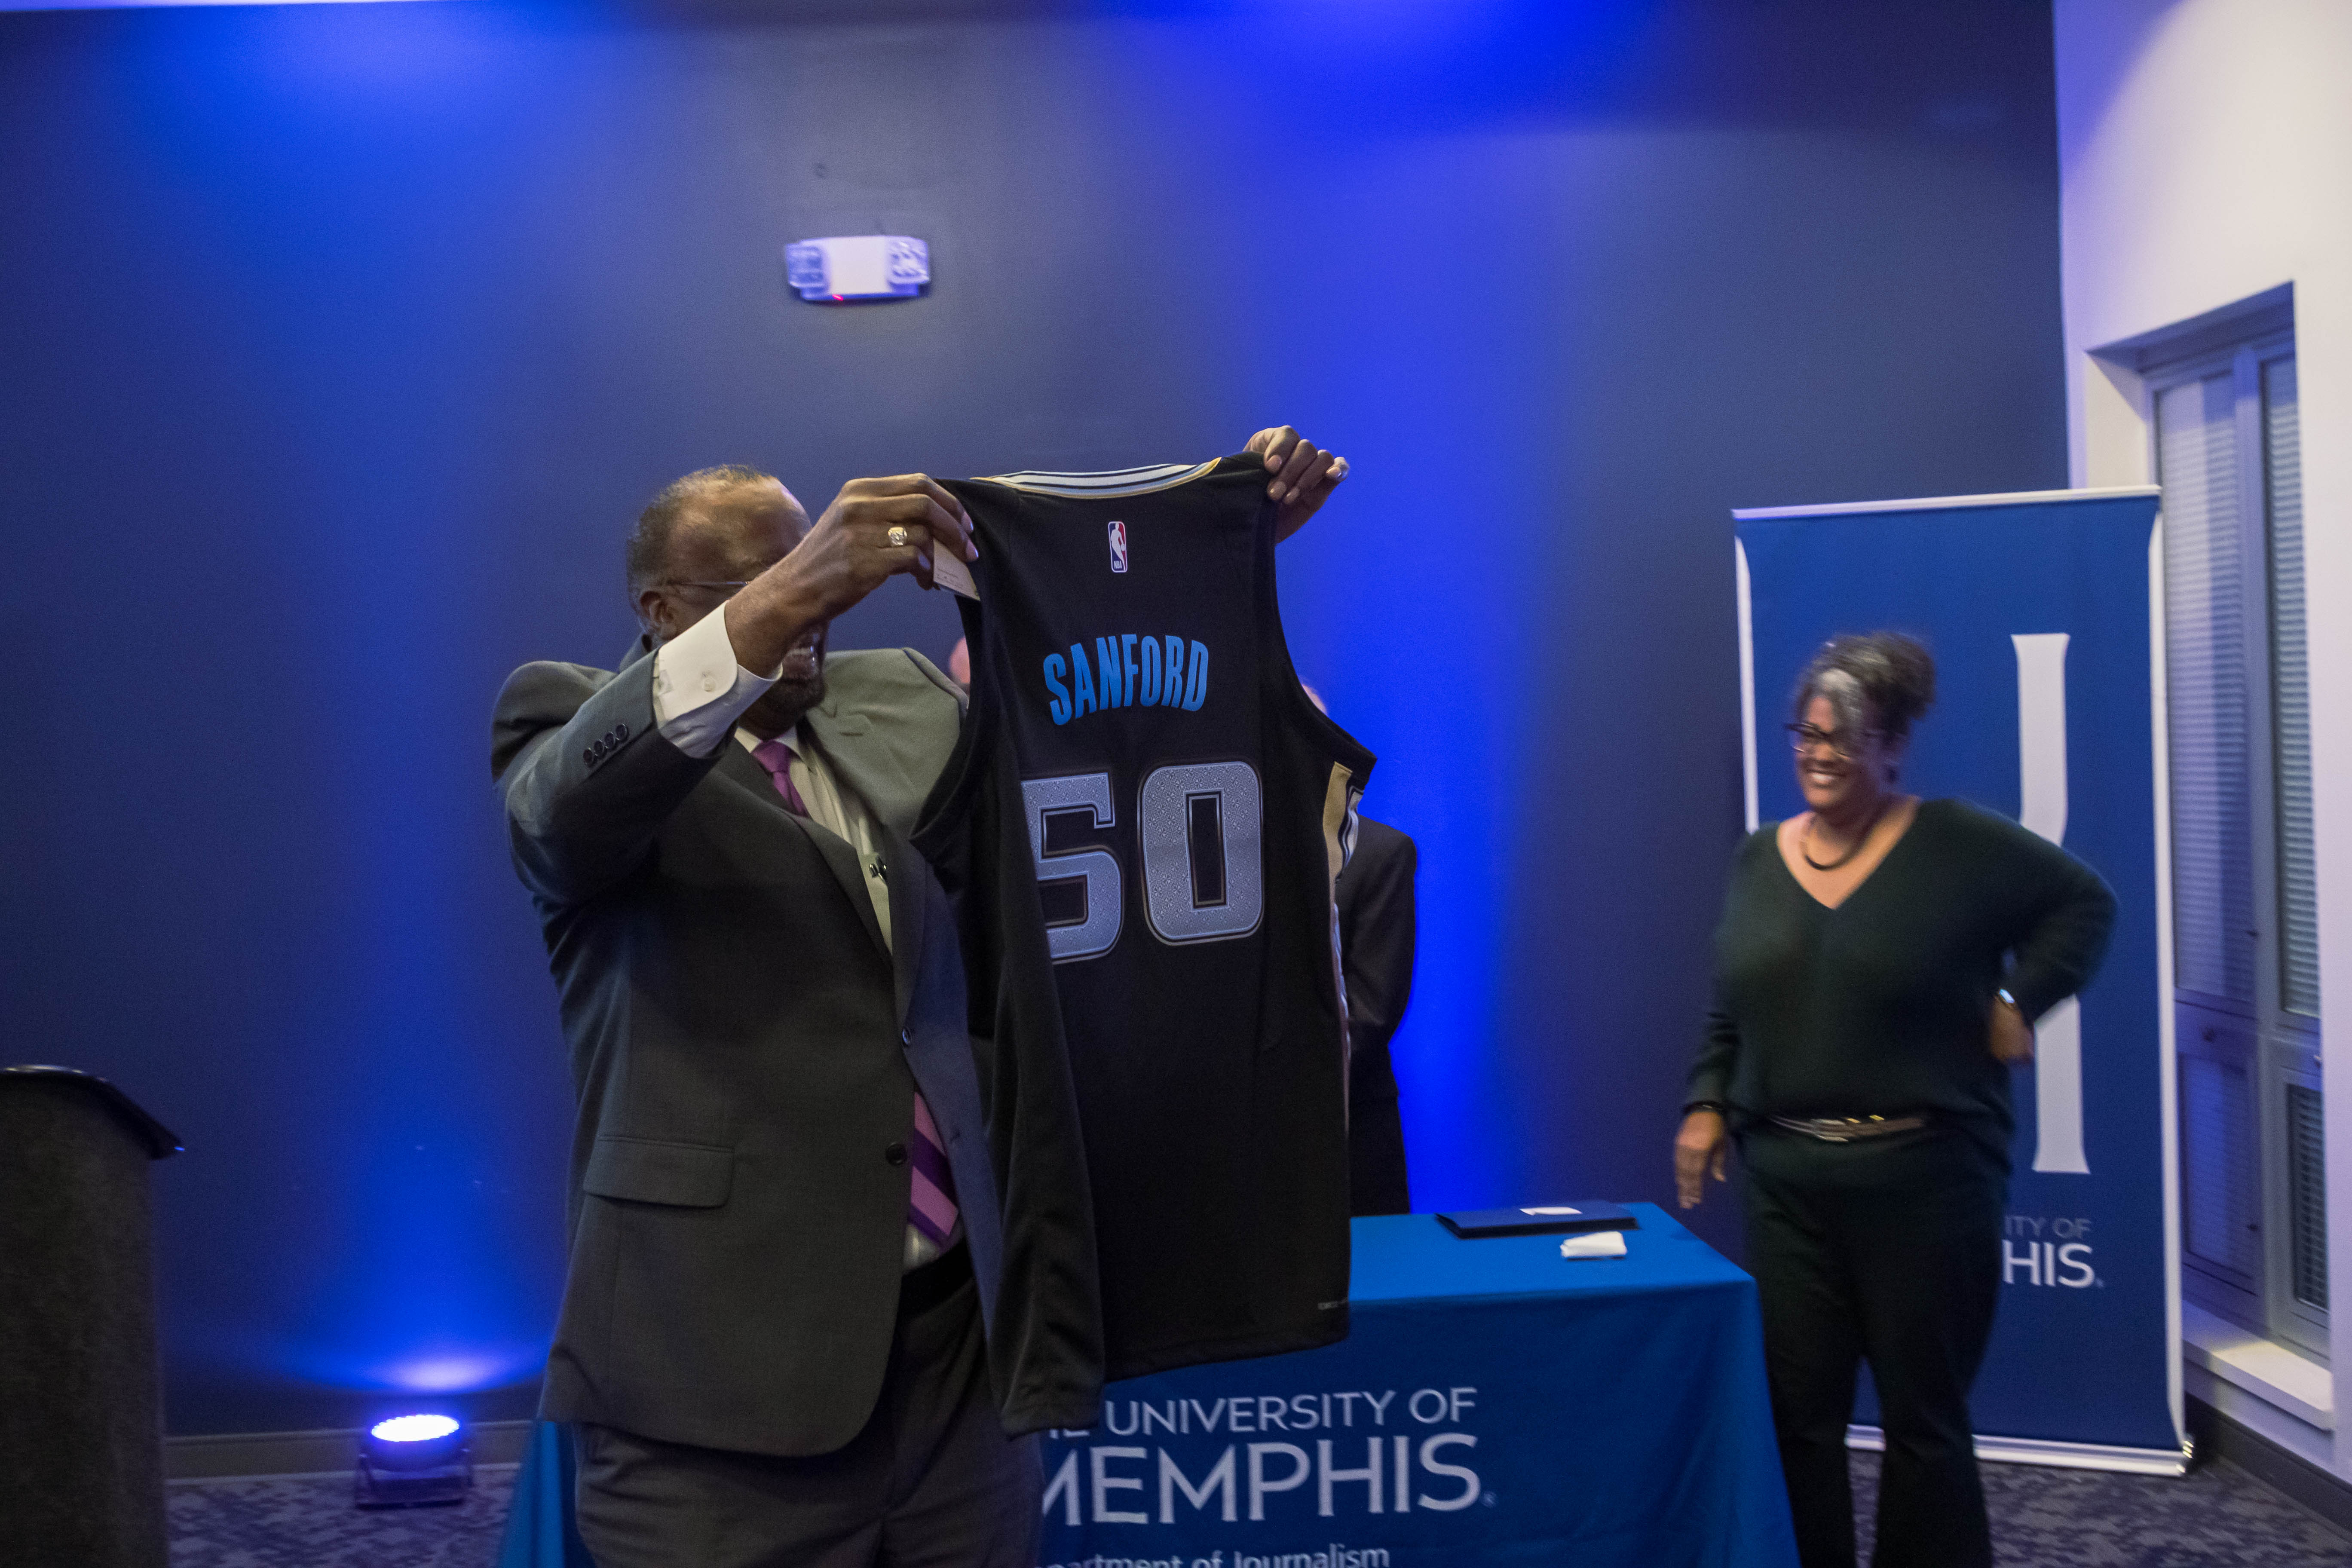 Professor Otis Sanford shows off one of the gifts he received  on the event of his retirement from the department.